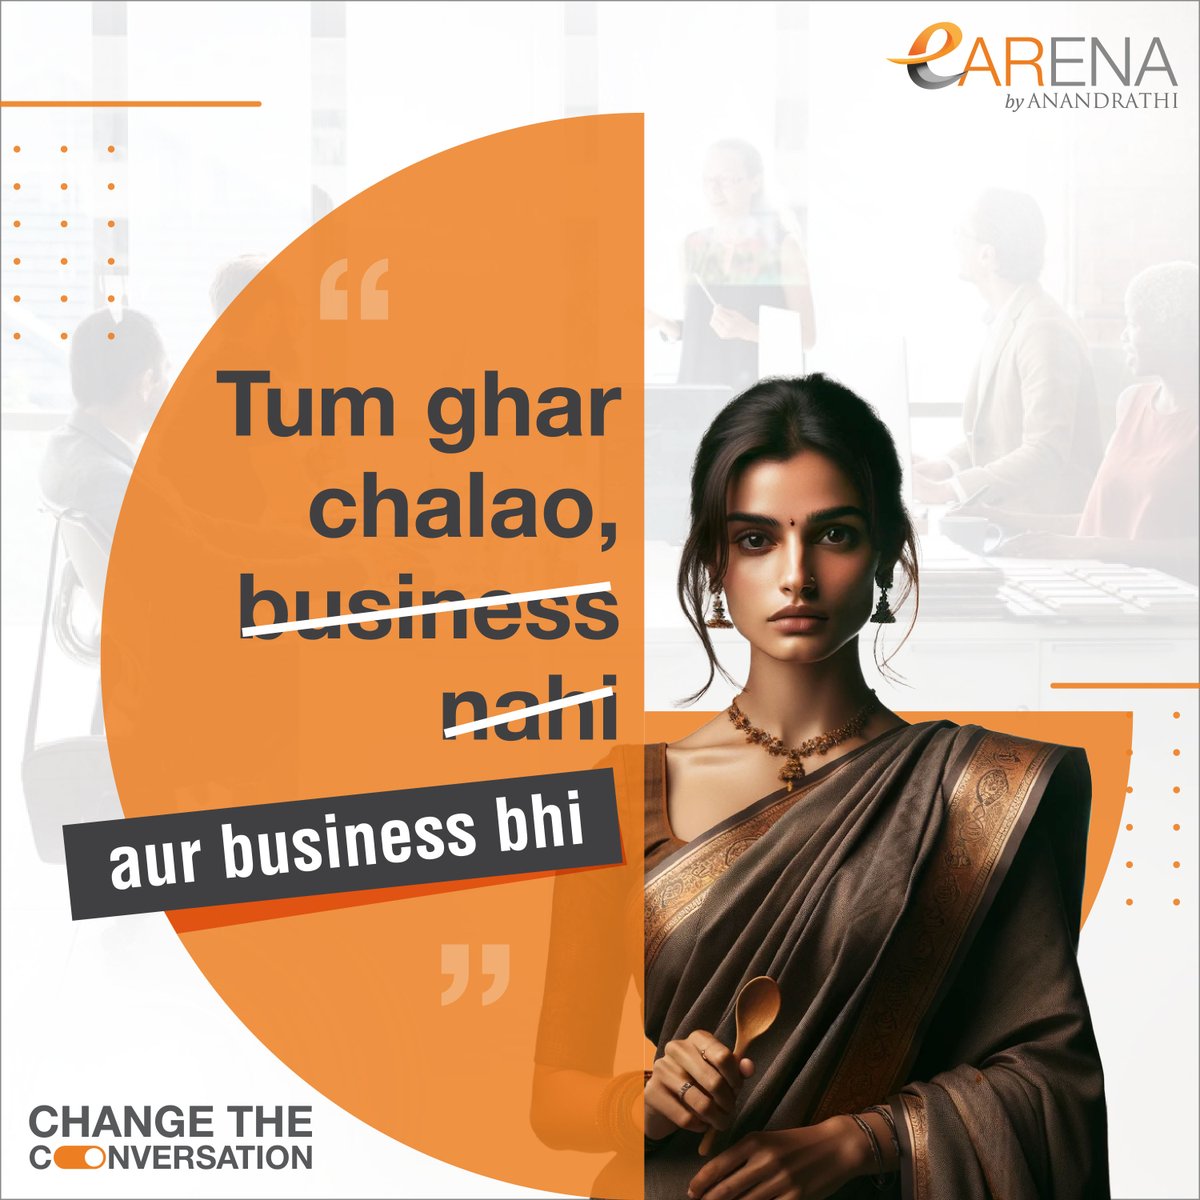 Aapke ghar ki laxmi khud laxmi ghar laa sakti hai!
Cooking and cleaning can make us capable but financing, investing, budgeting, business skills can make us truly independent!

So this #WomensDay, let's #ChangeTheConversation by empowering women's financial & business education🙌